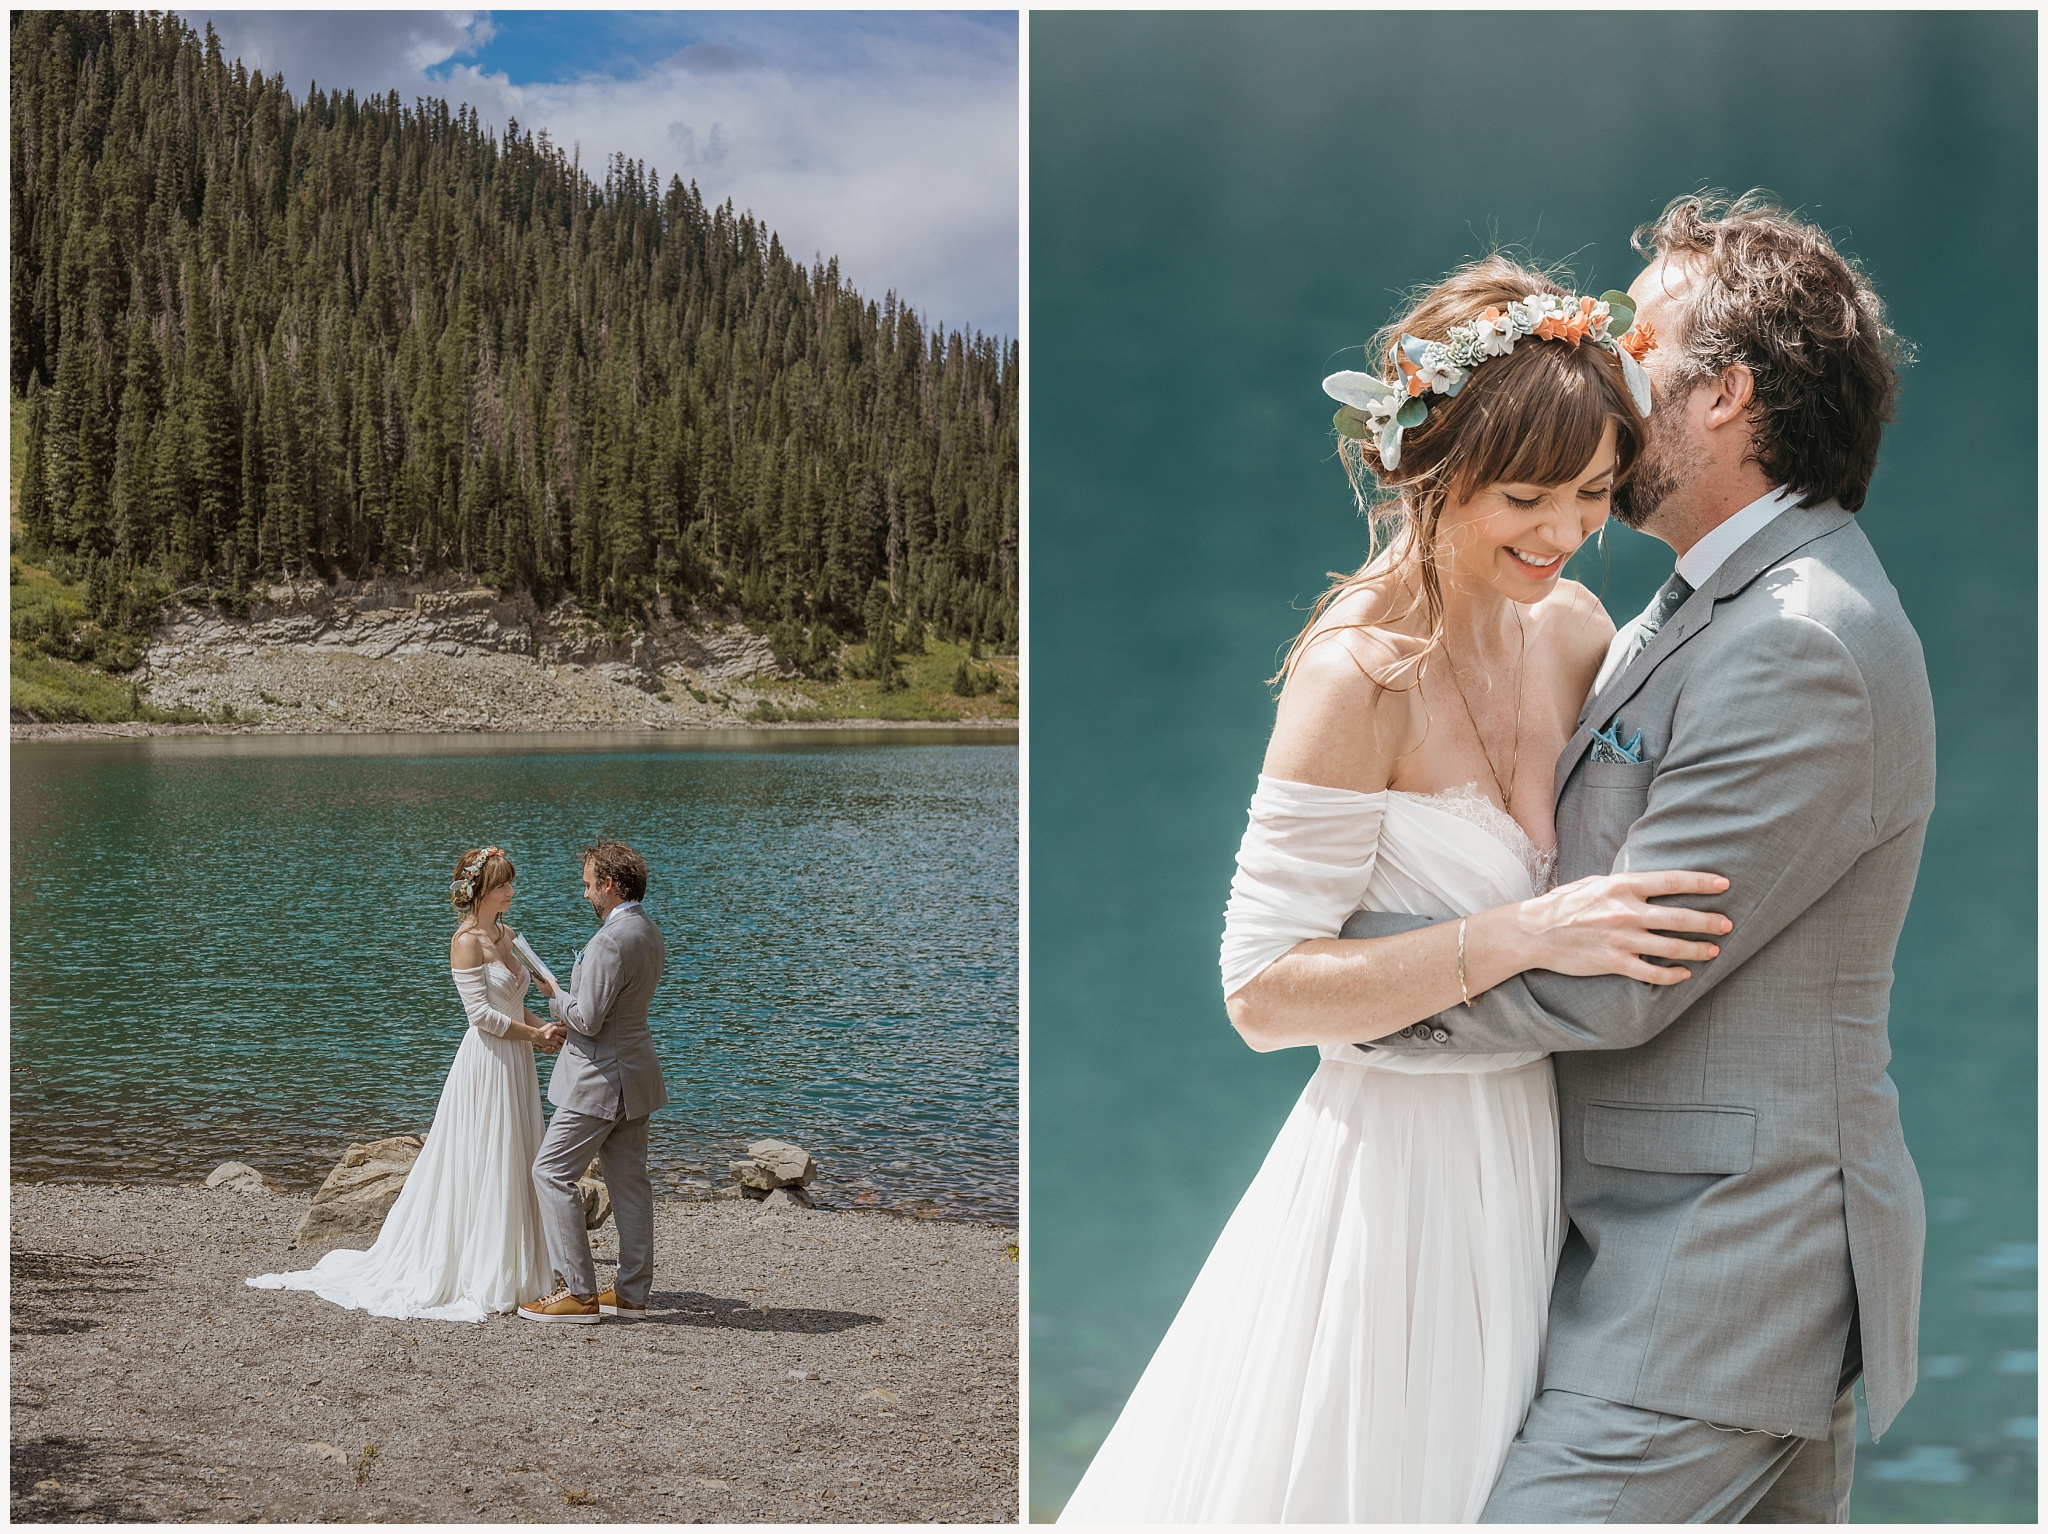 Place to Elope in Colorado, Emerald Lake, Emerald Lake Elopement, Colorado Elopement, Colorado Mountain Wedding, Colorado Mountain Elopement, Places to Elope in Colorado, Colorado Wedding, Colorado Elopement Ideas, Elopement Photos